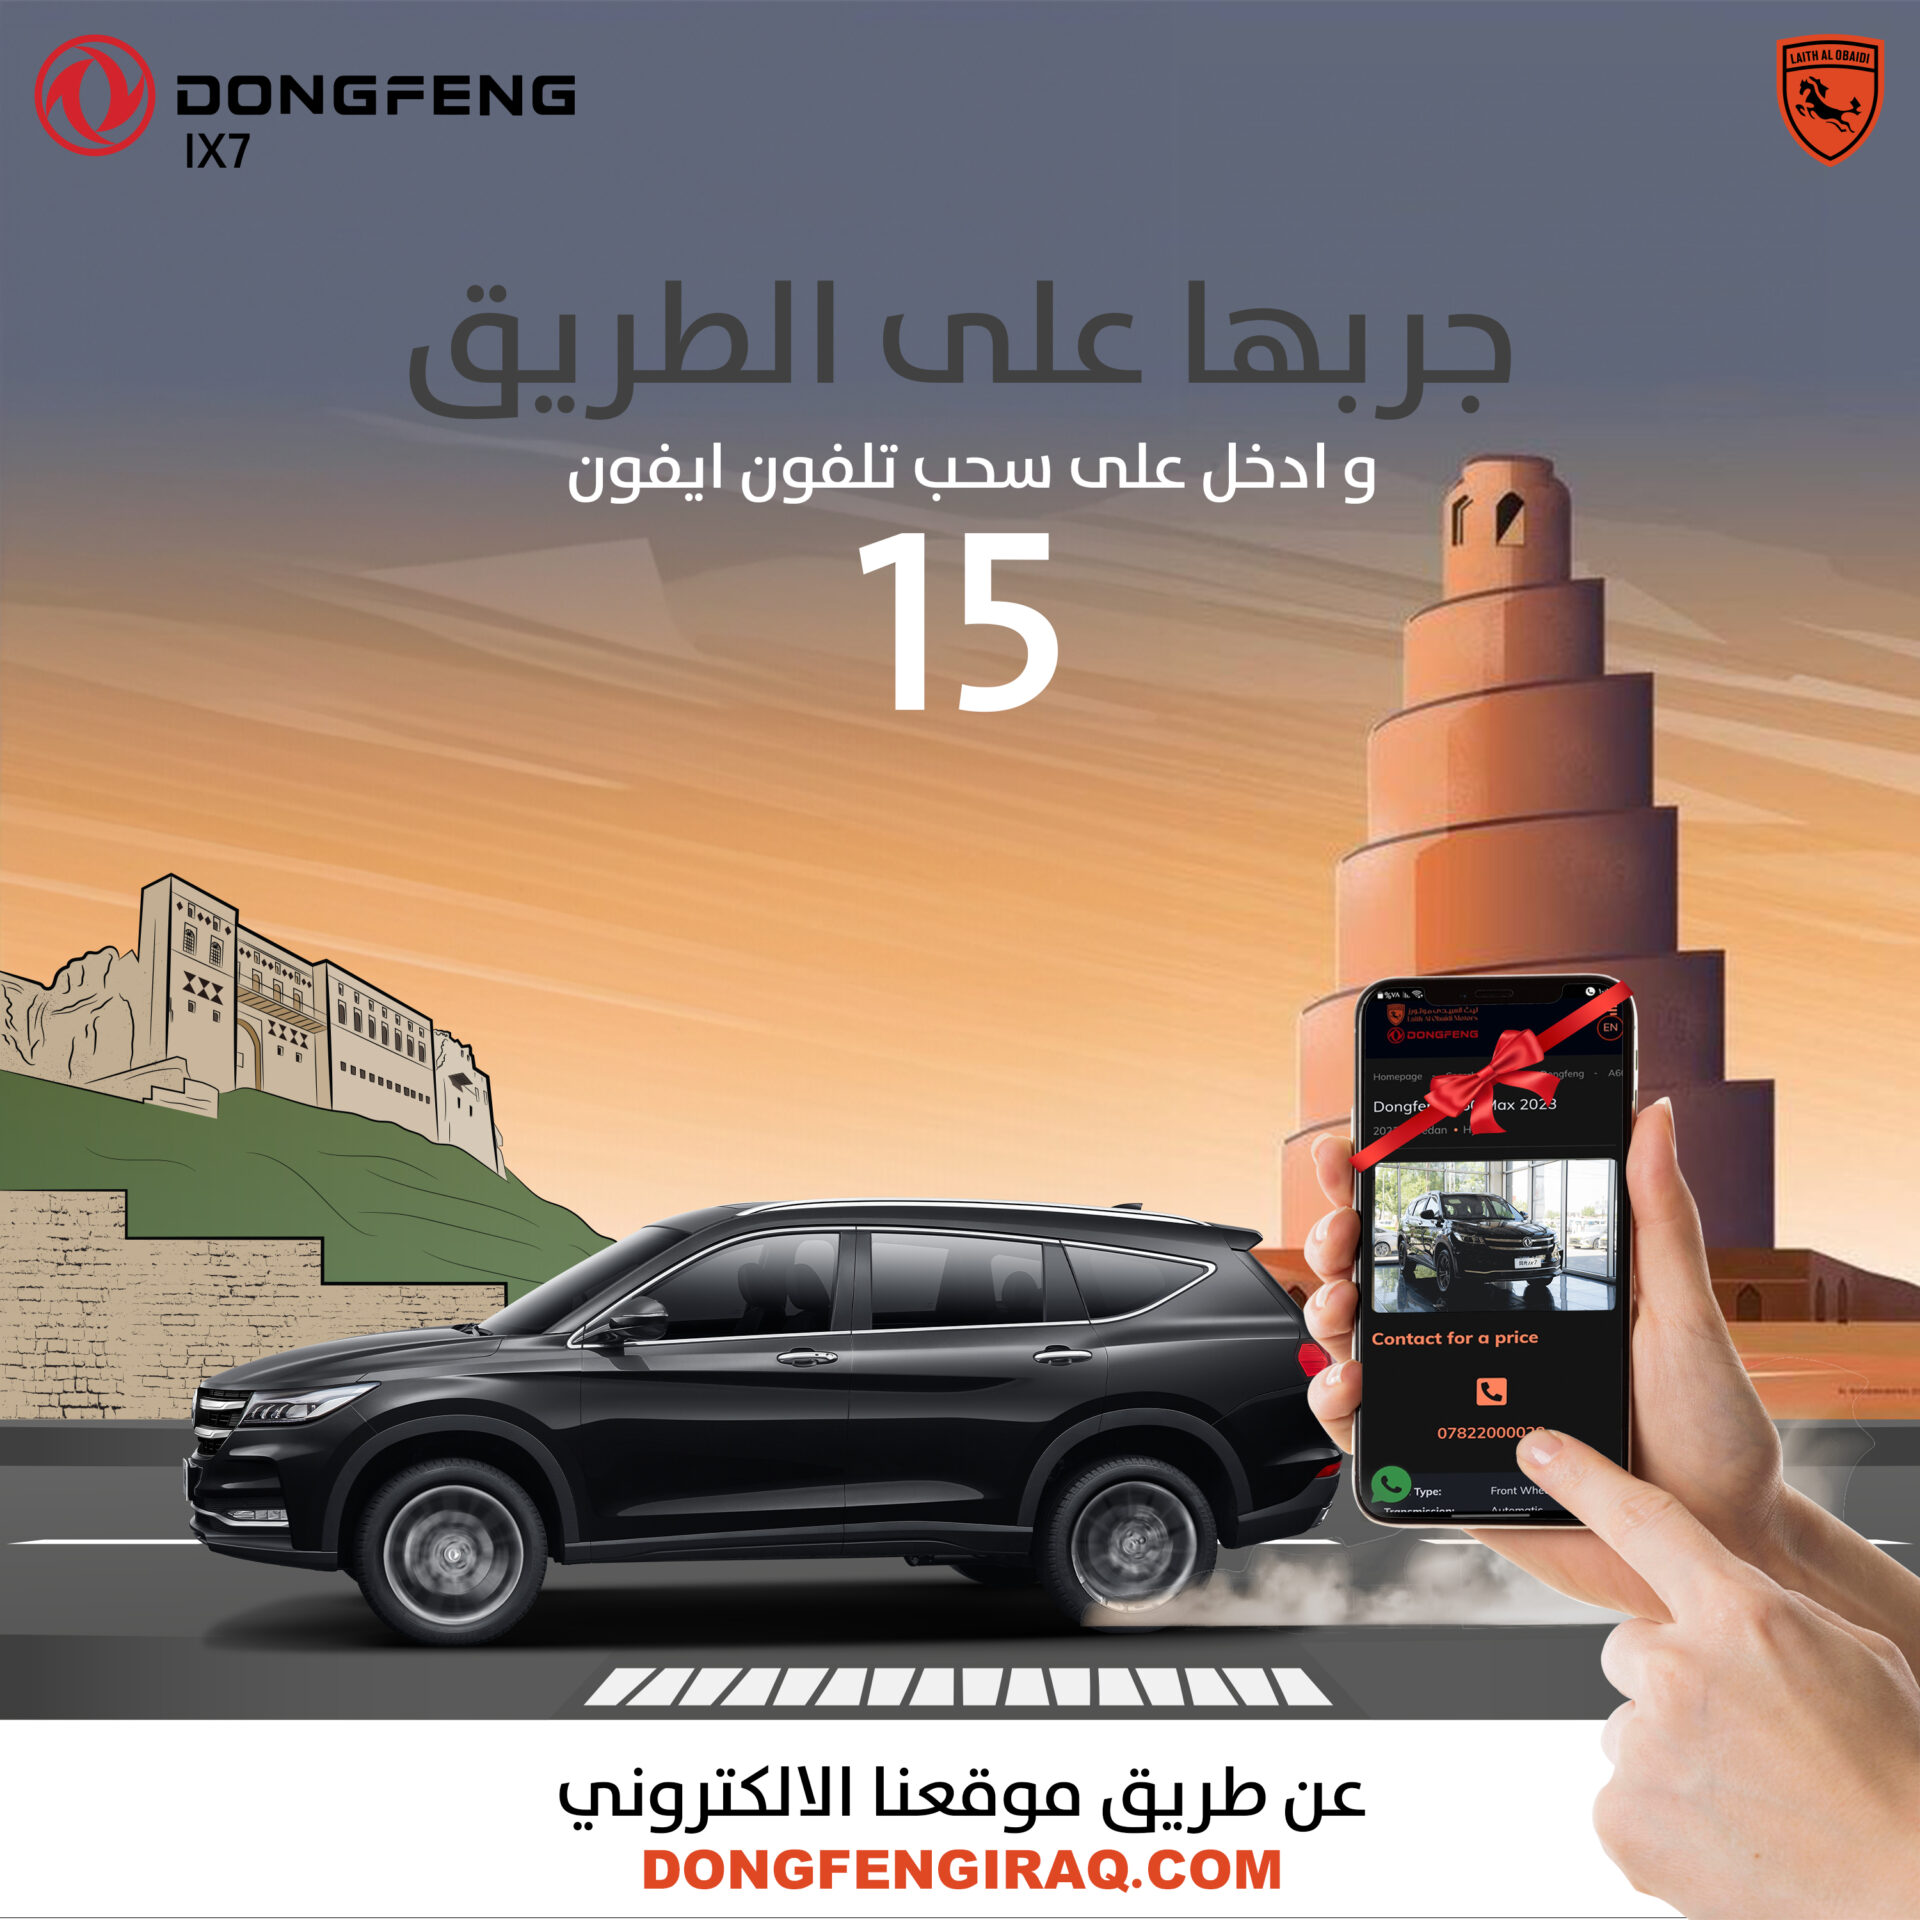 Dongfeng car test drive